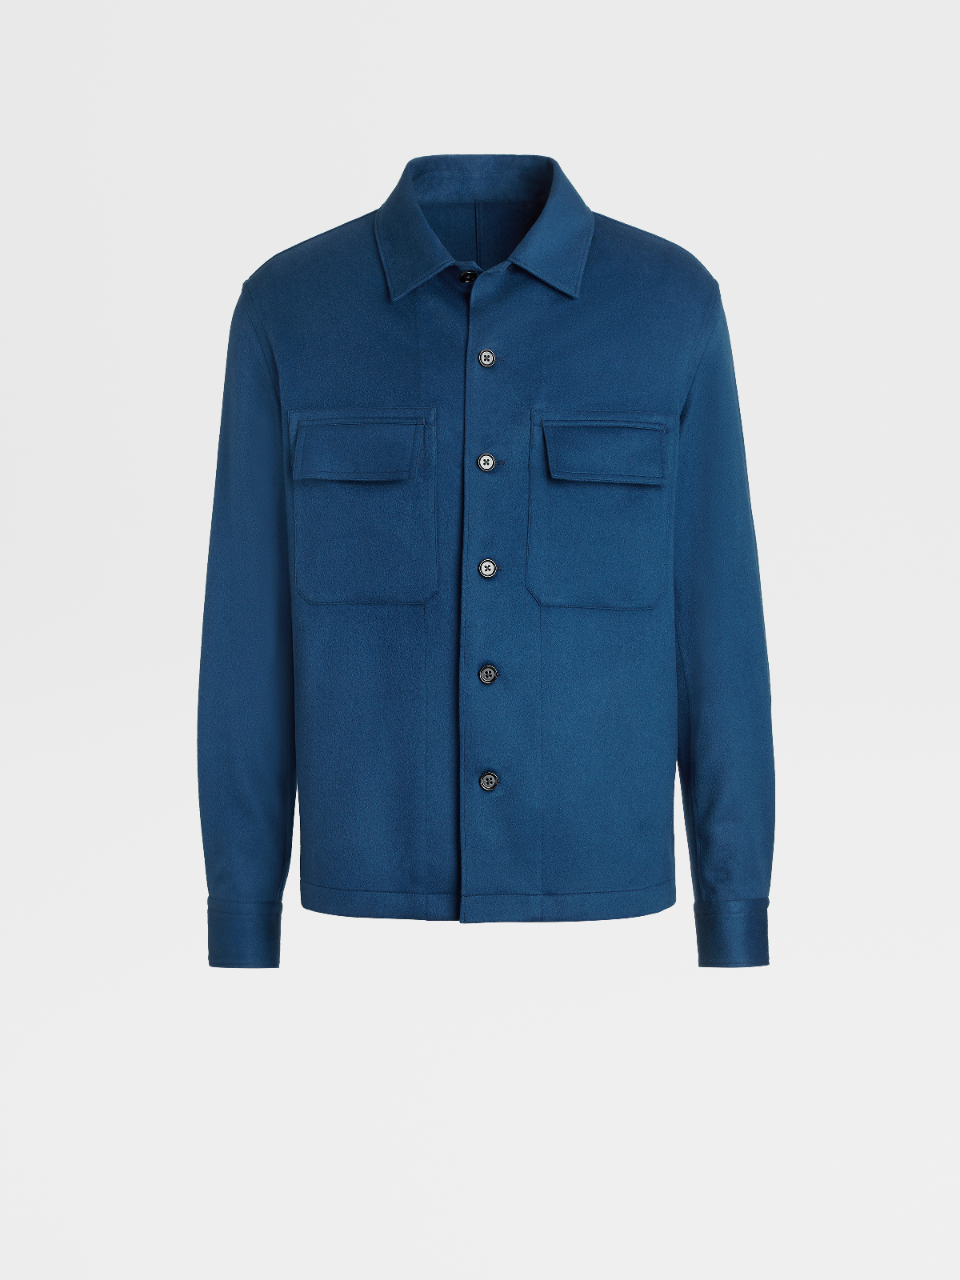 Teal Pure Cashmere Overshirt